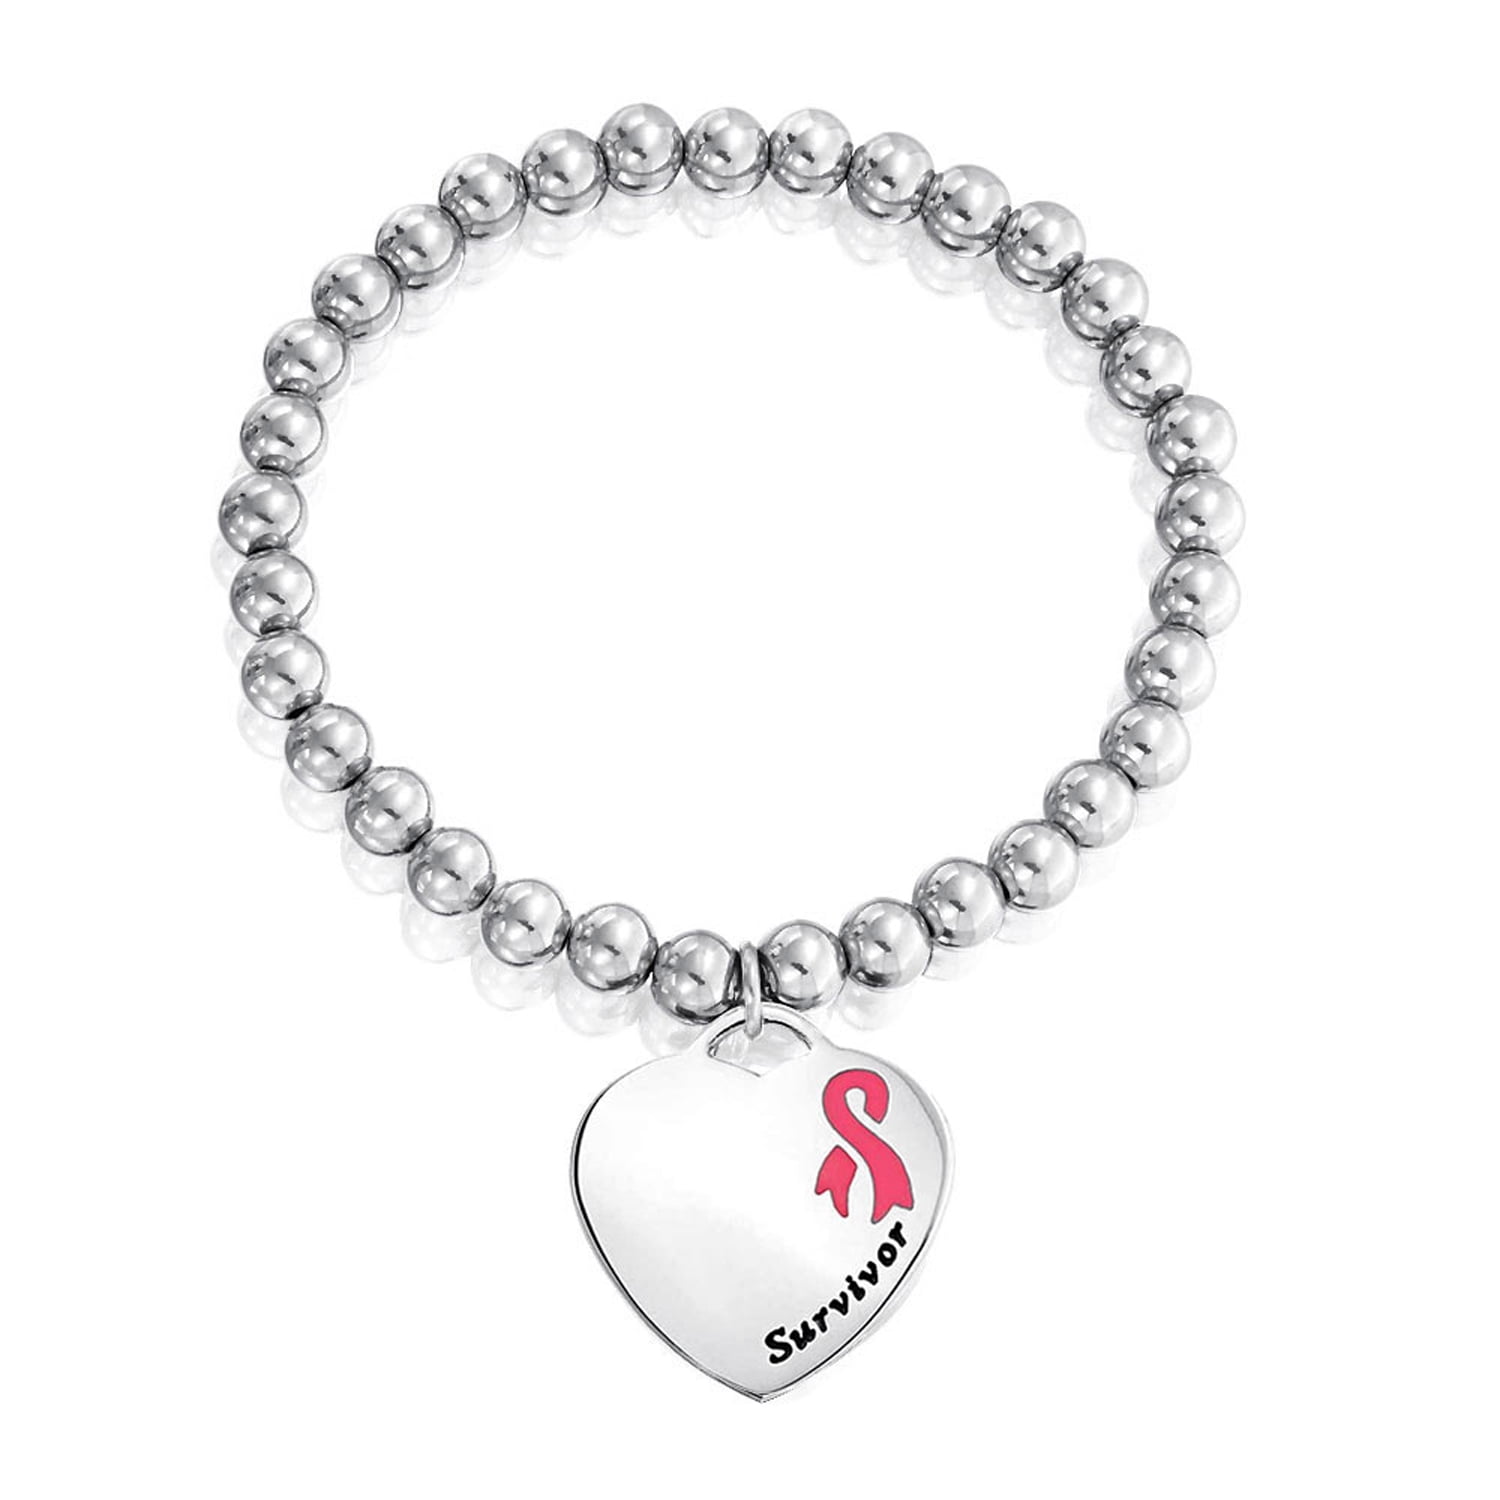 My Identity Doctor Red Black & Steel Hearts Pre-Engraved & Customized Women’s Breast Cancer Toggle Medical Charm Bracelet